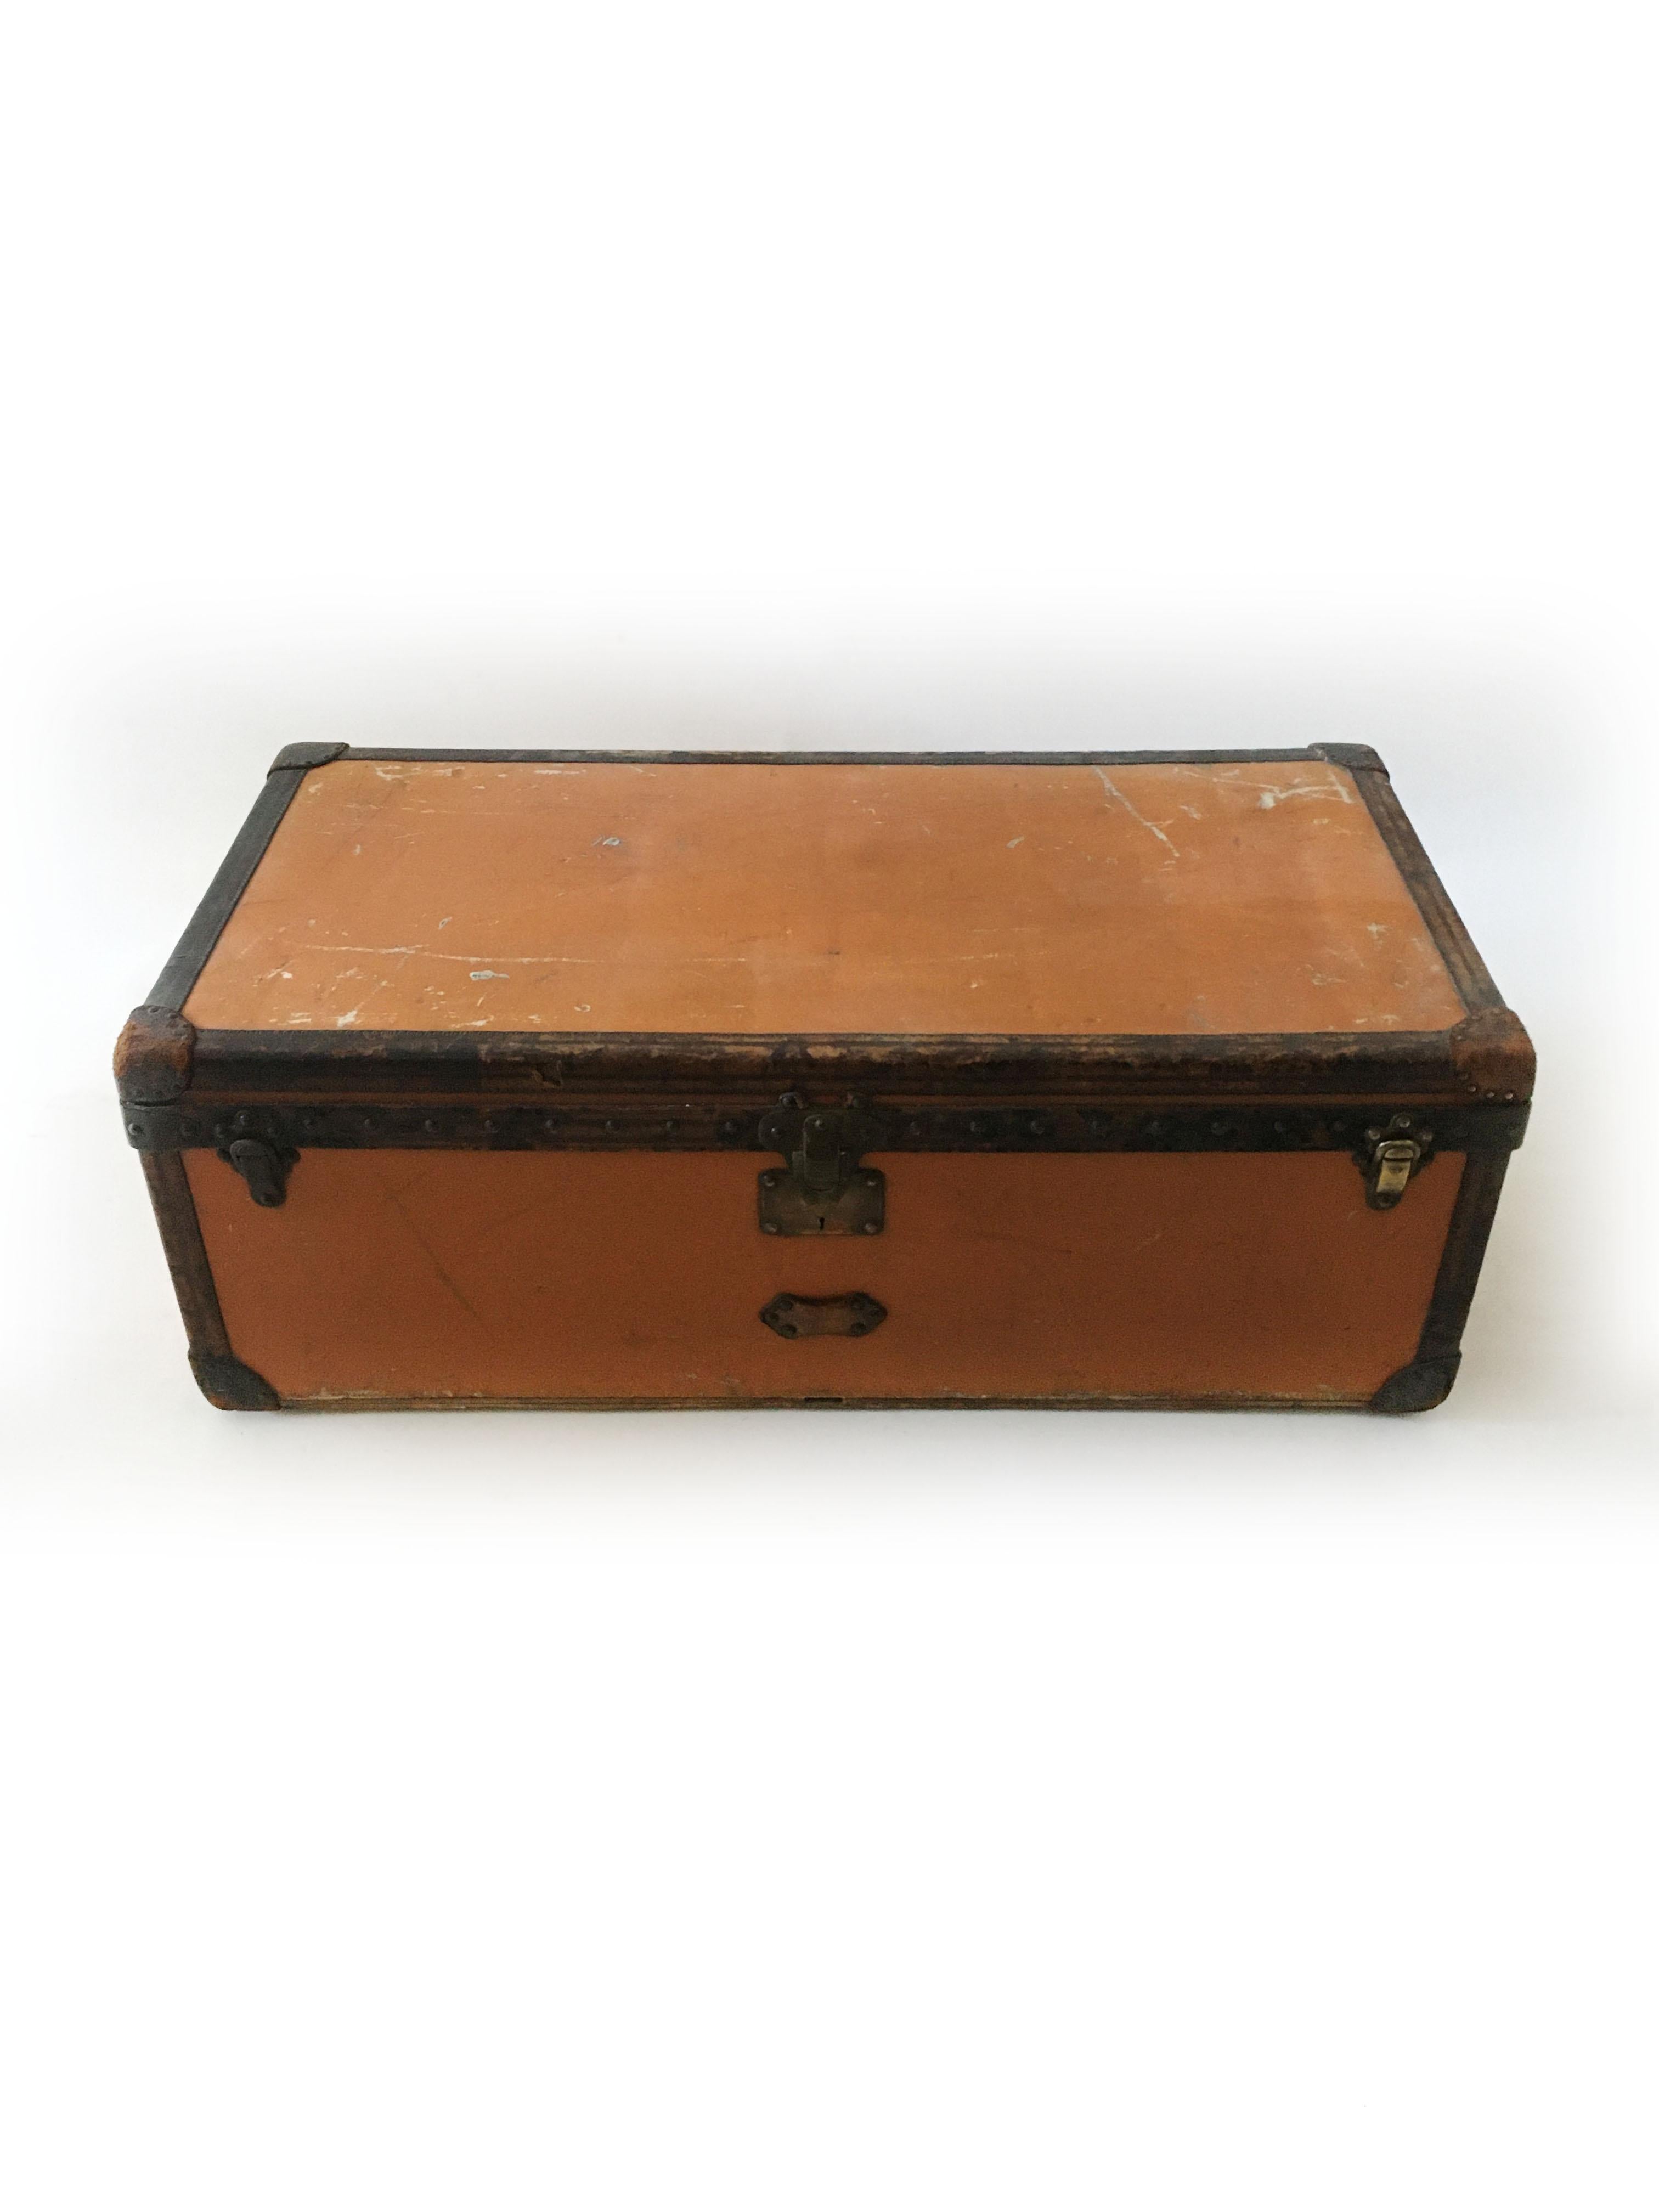 Large Louis Vuitton orange Vuittonite canvas steamer trunk, turn of the century, circa 1910. This wonderful Louis Vuitton orange Vuittonite trunk shows signs of wear, especially to the top that has been used for so many years. We didn't attempt to